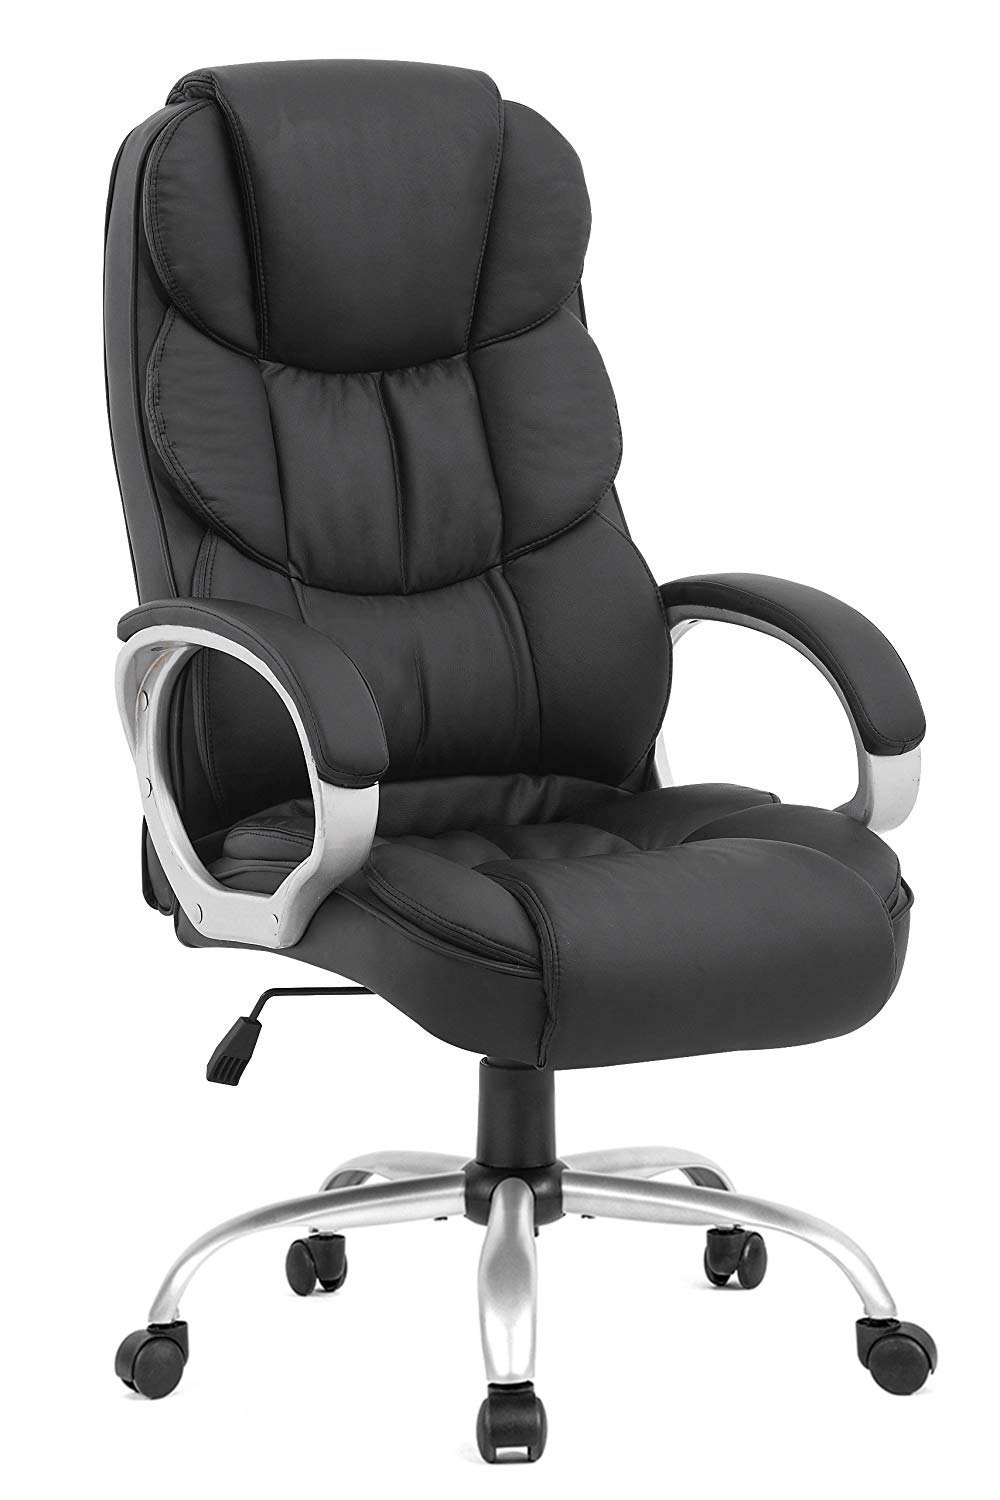 Best Budget Office Chair 2021 Take A Look At Our Buying Guide